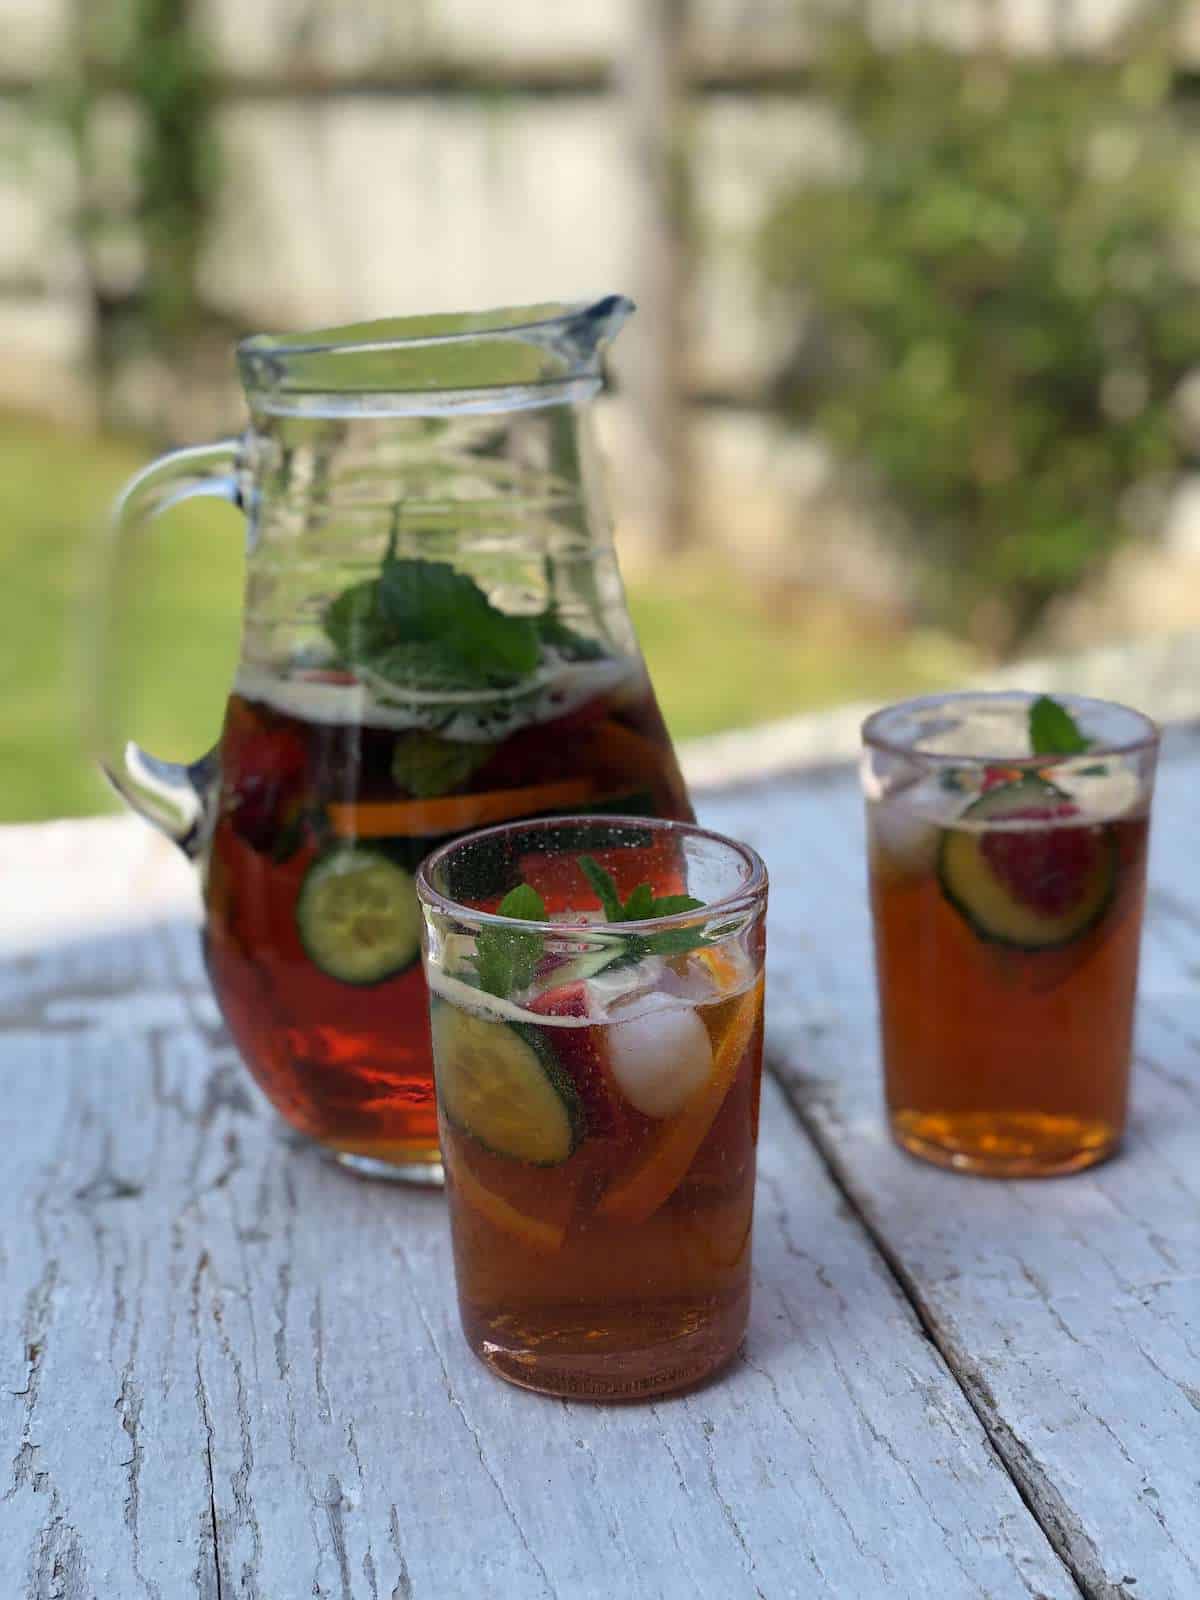  A jug of pimms on a wooden table. 